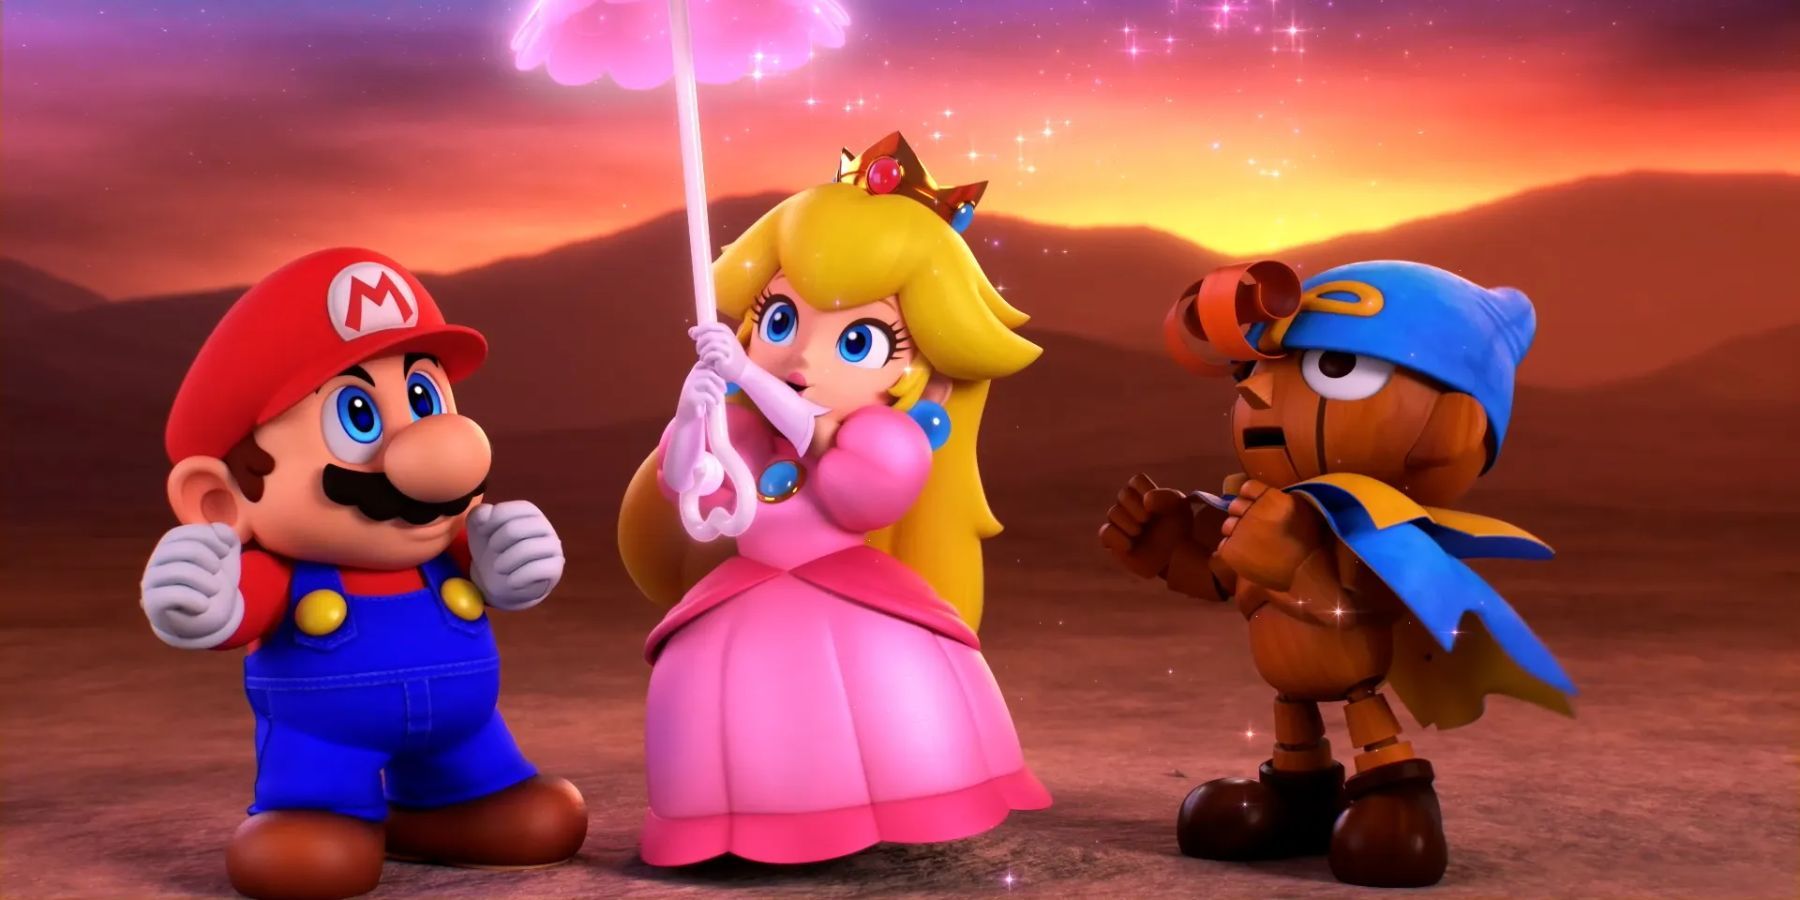 Super Mario RPG's updates are looking both whimsical and bittersweet